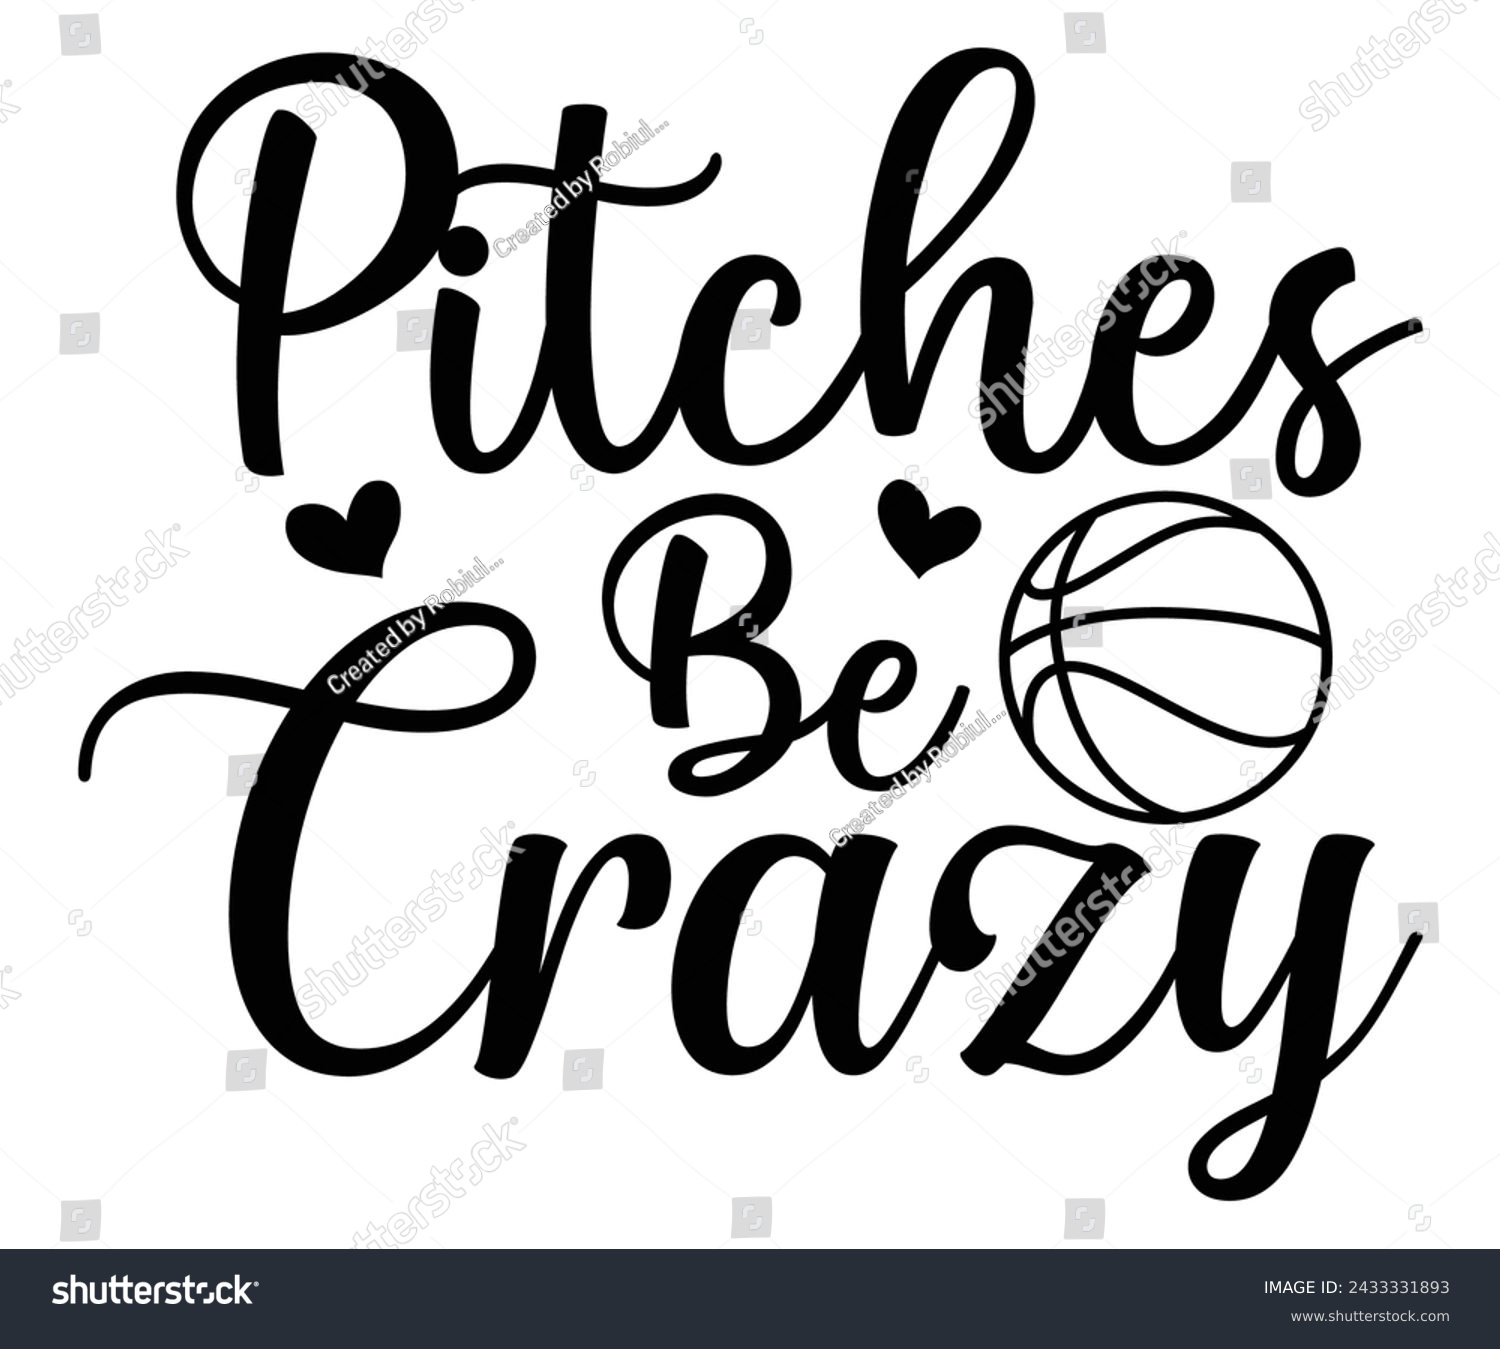 SVG of  Pitches Be Crazy, Baseball Mom Shirt Svg,Sports Dad, Baseball Day Shirt Svg,Baseball Team Shirt, Game Day  Women, Funny Baseball Shirt Svg,Gift for Mom, Cut File, Eps File svg